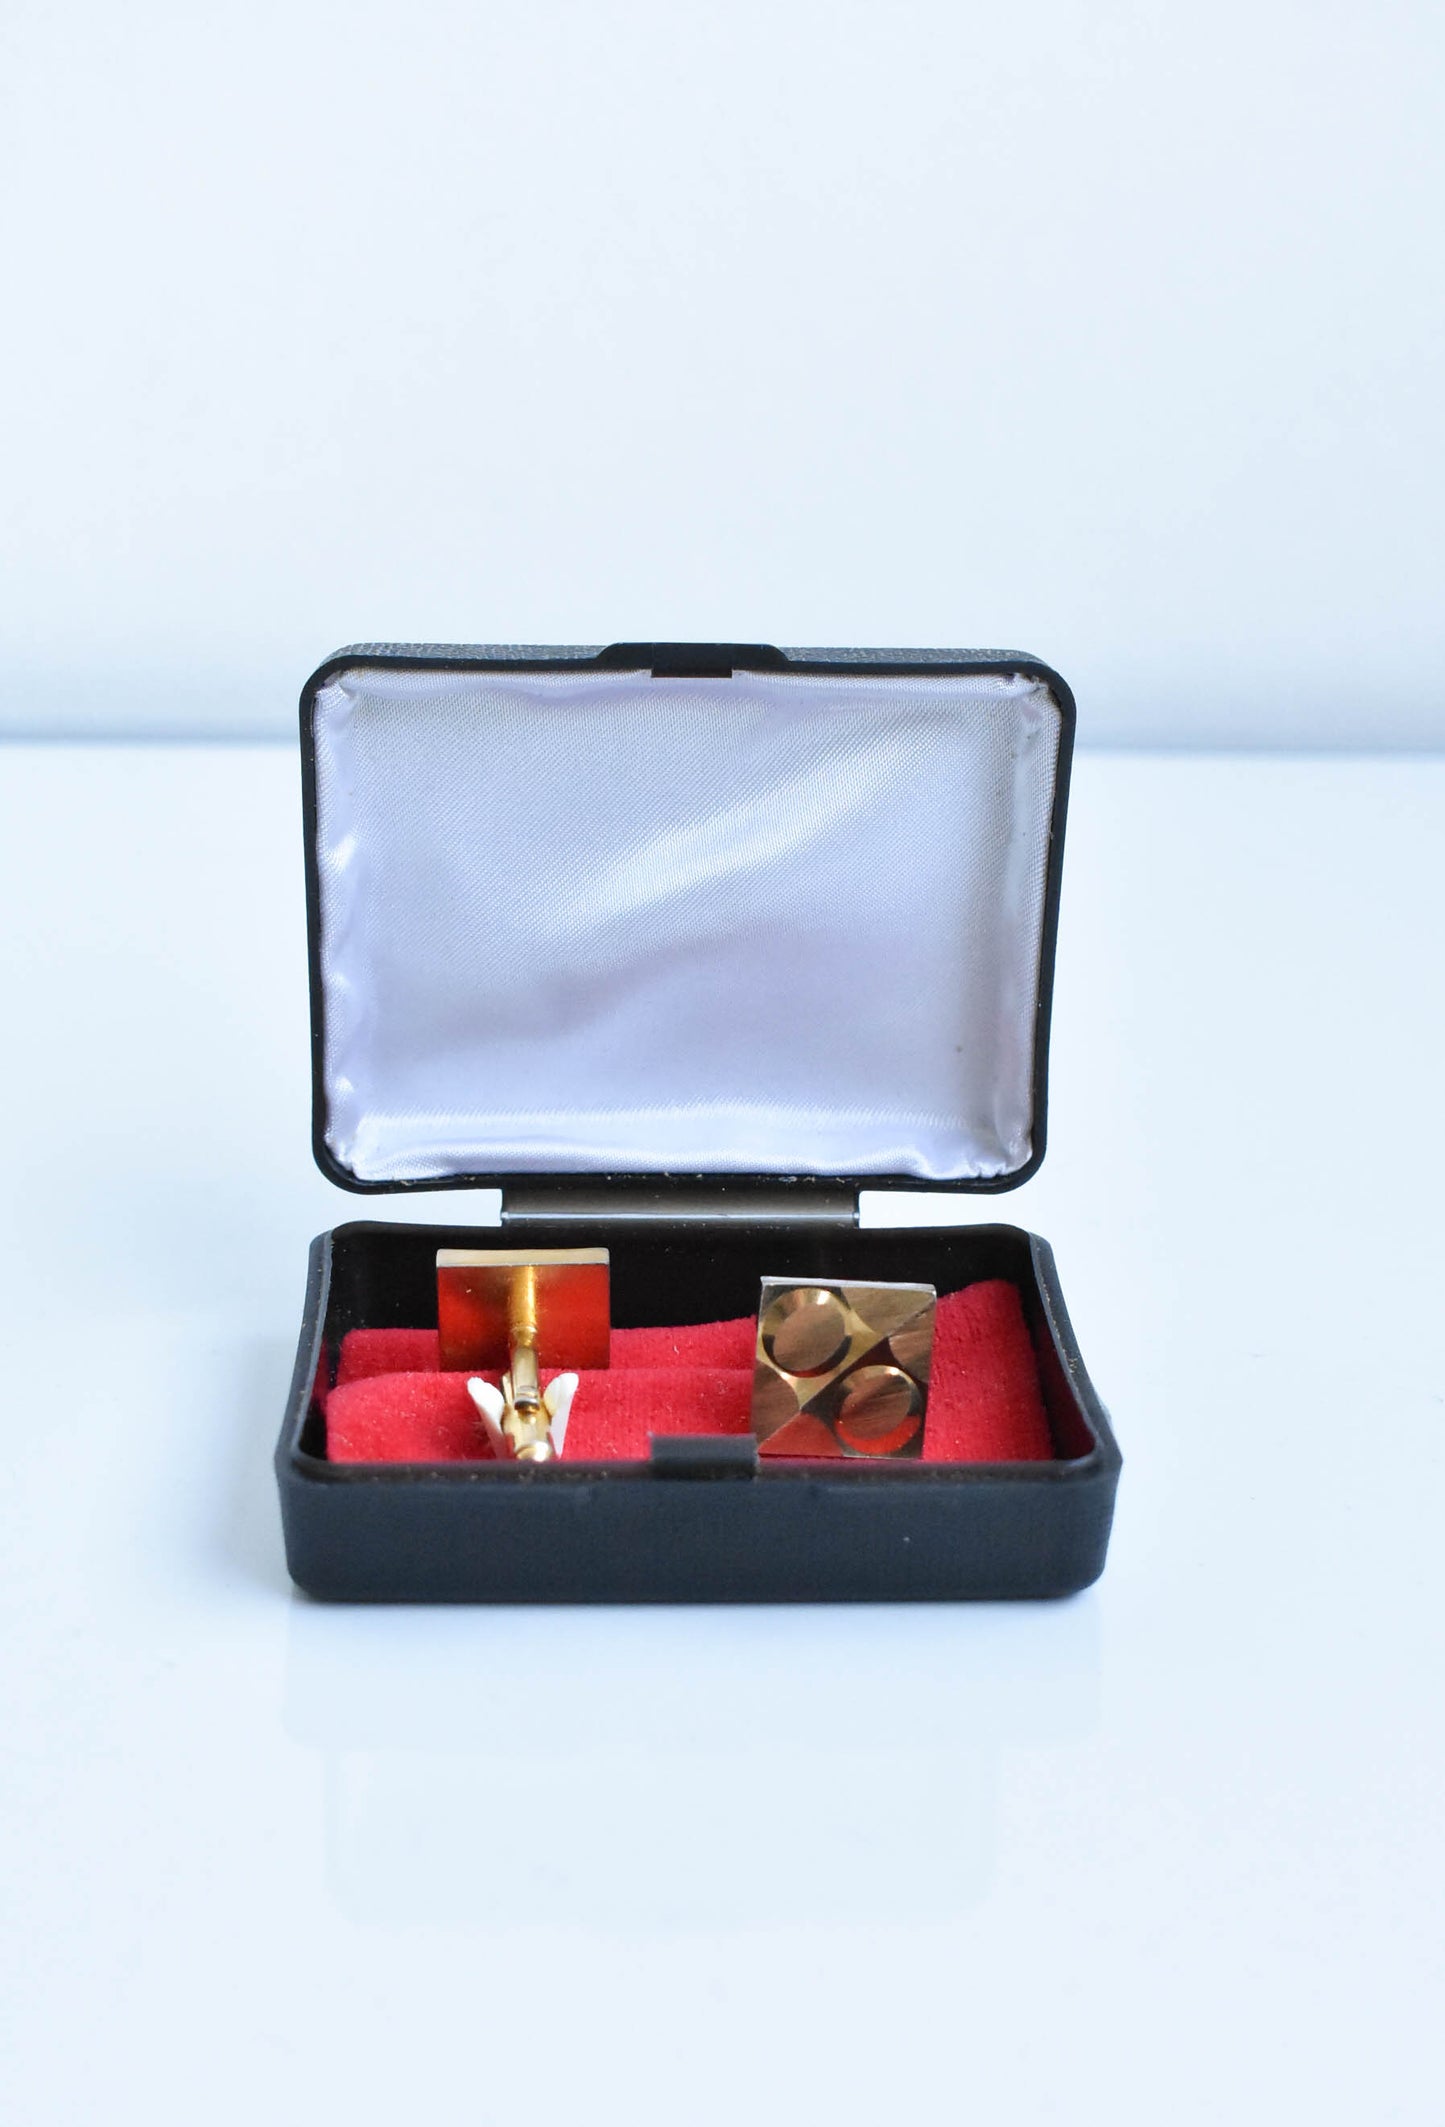 Retro cufflinks in box, golden with square emblem